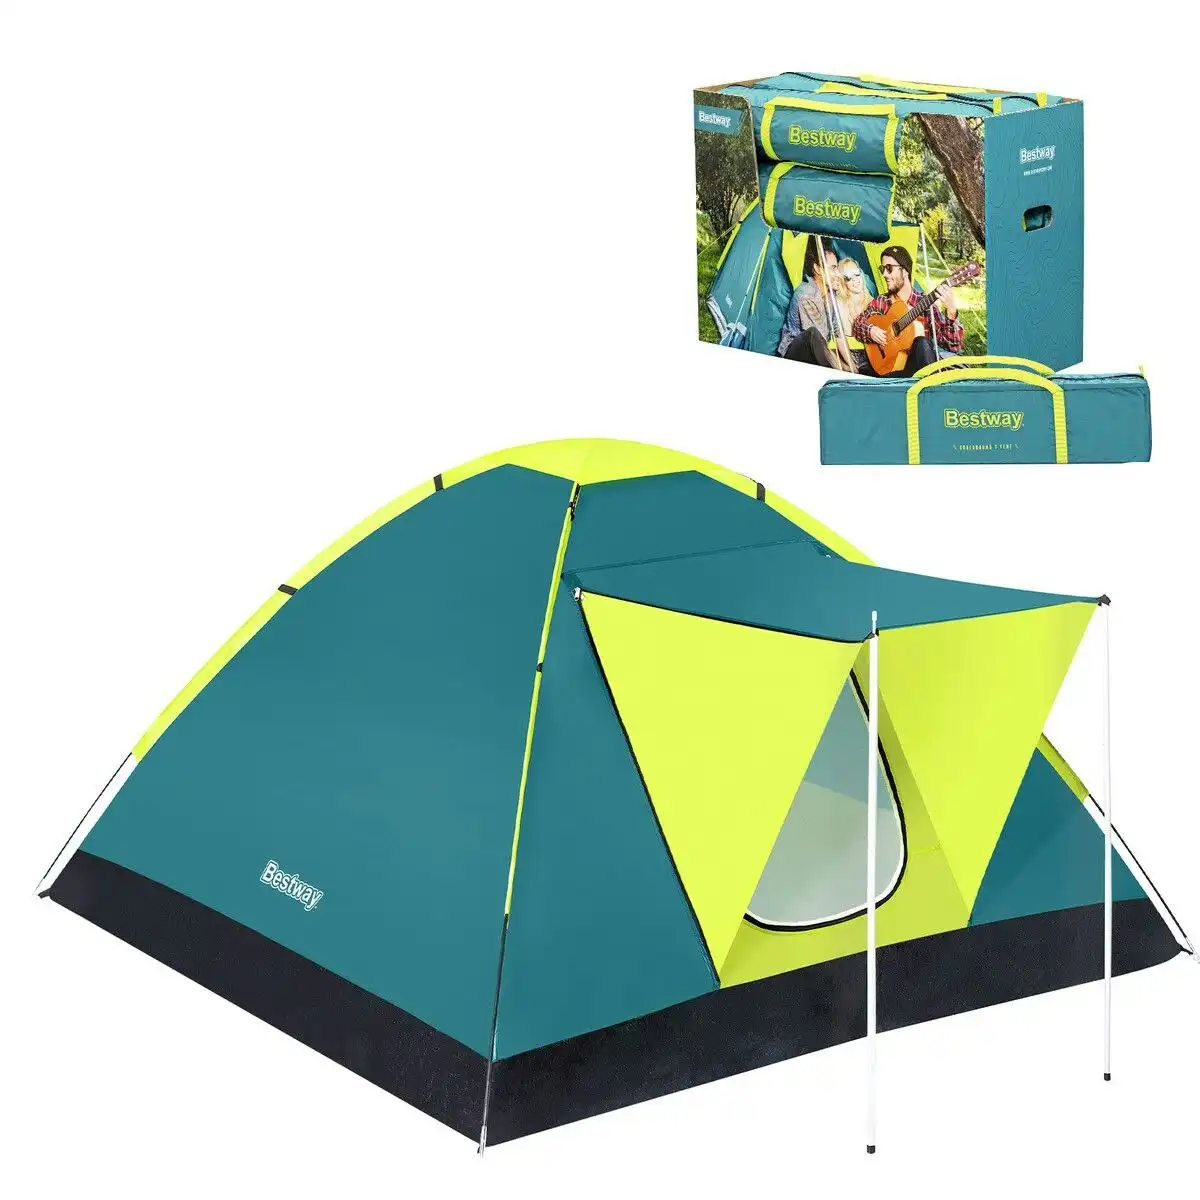 Bestway  Coolground 3 Tent 2.10m X 2.10m X 1.20m Foldable Portable Camping Gear Hiking Outdoor